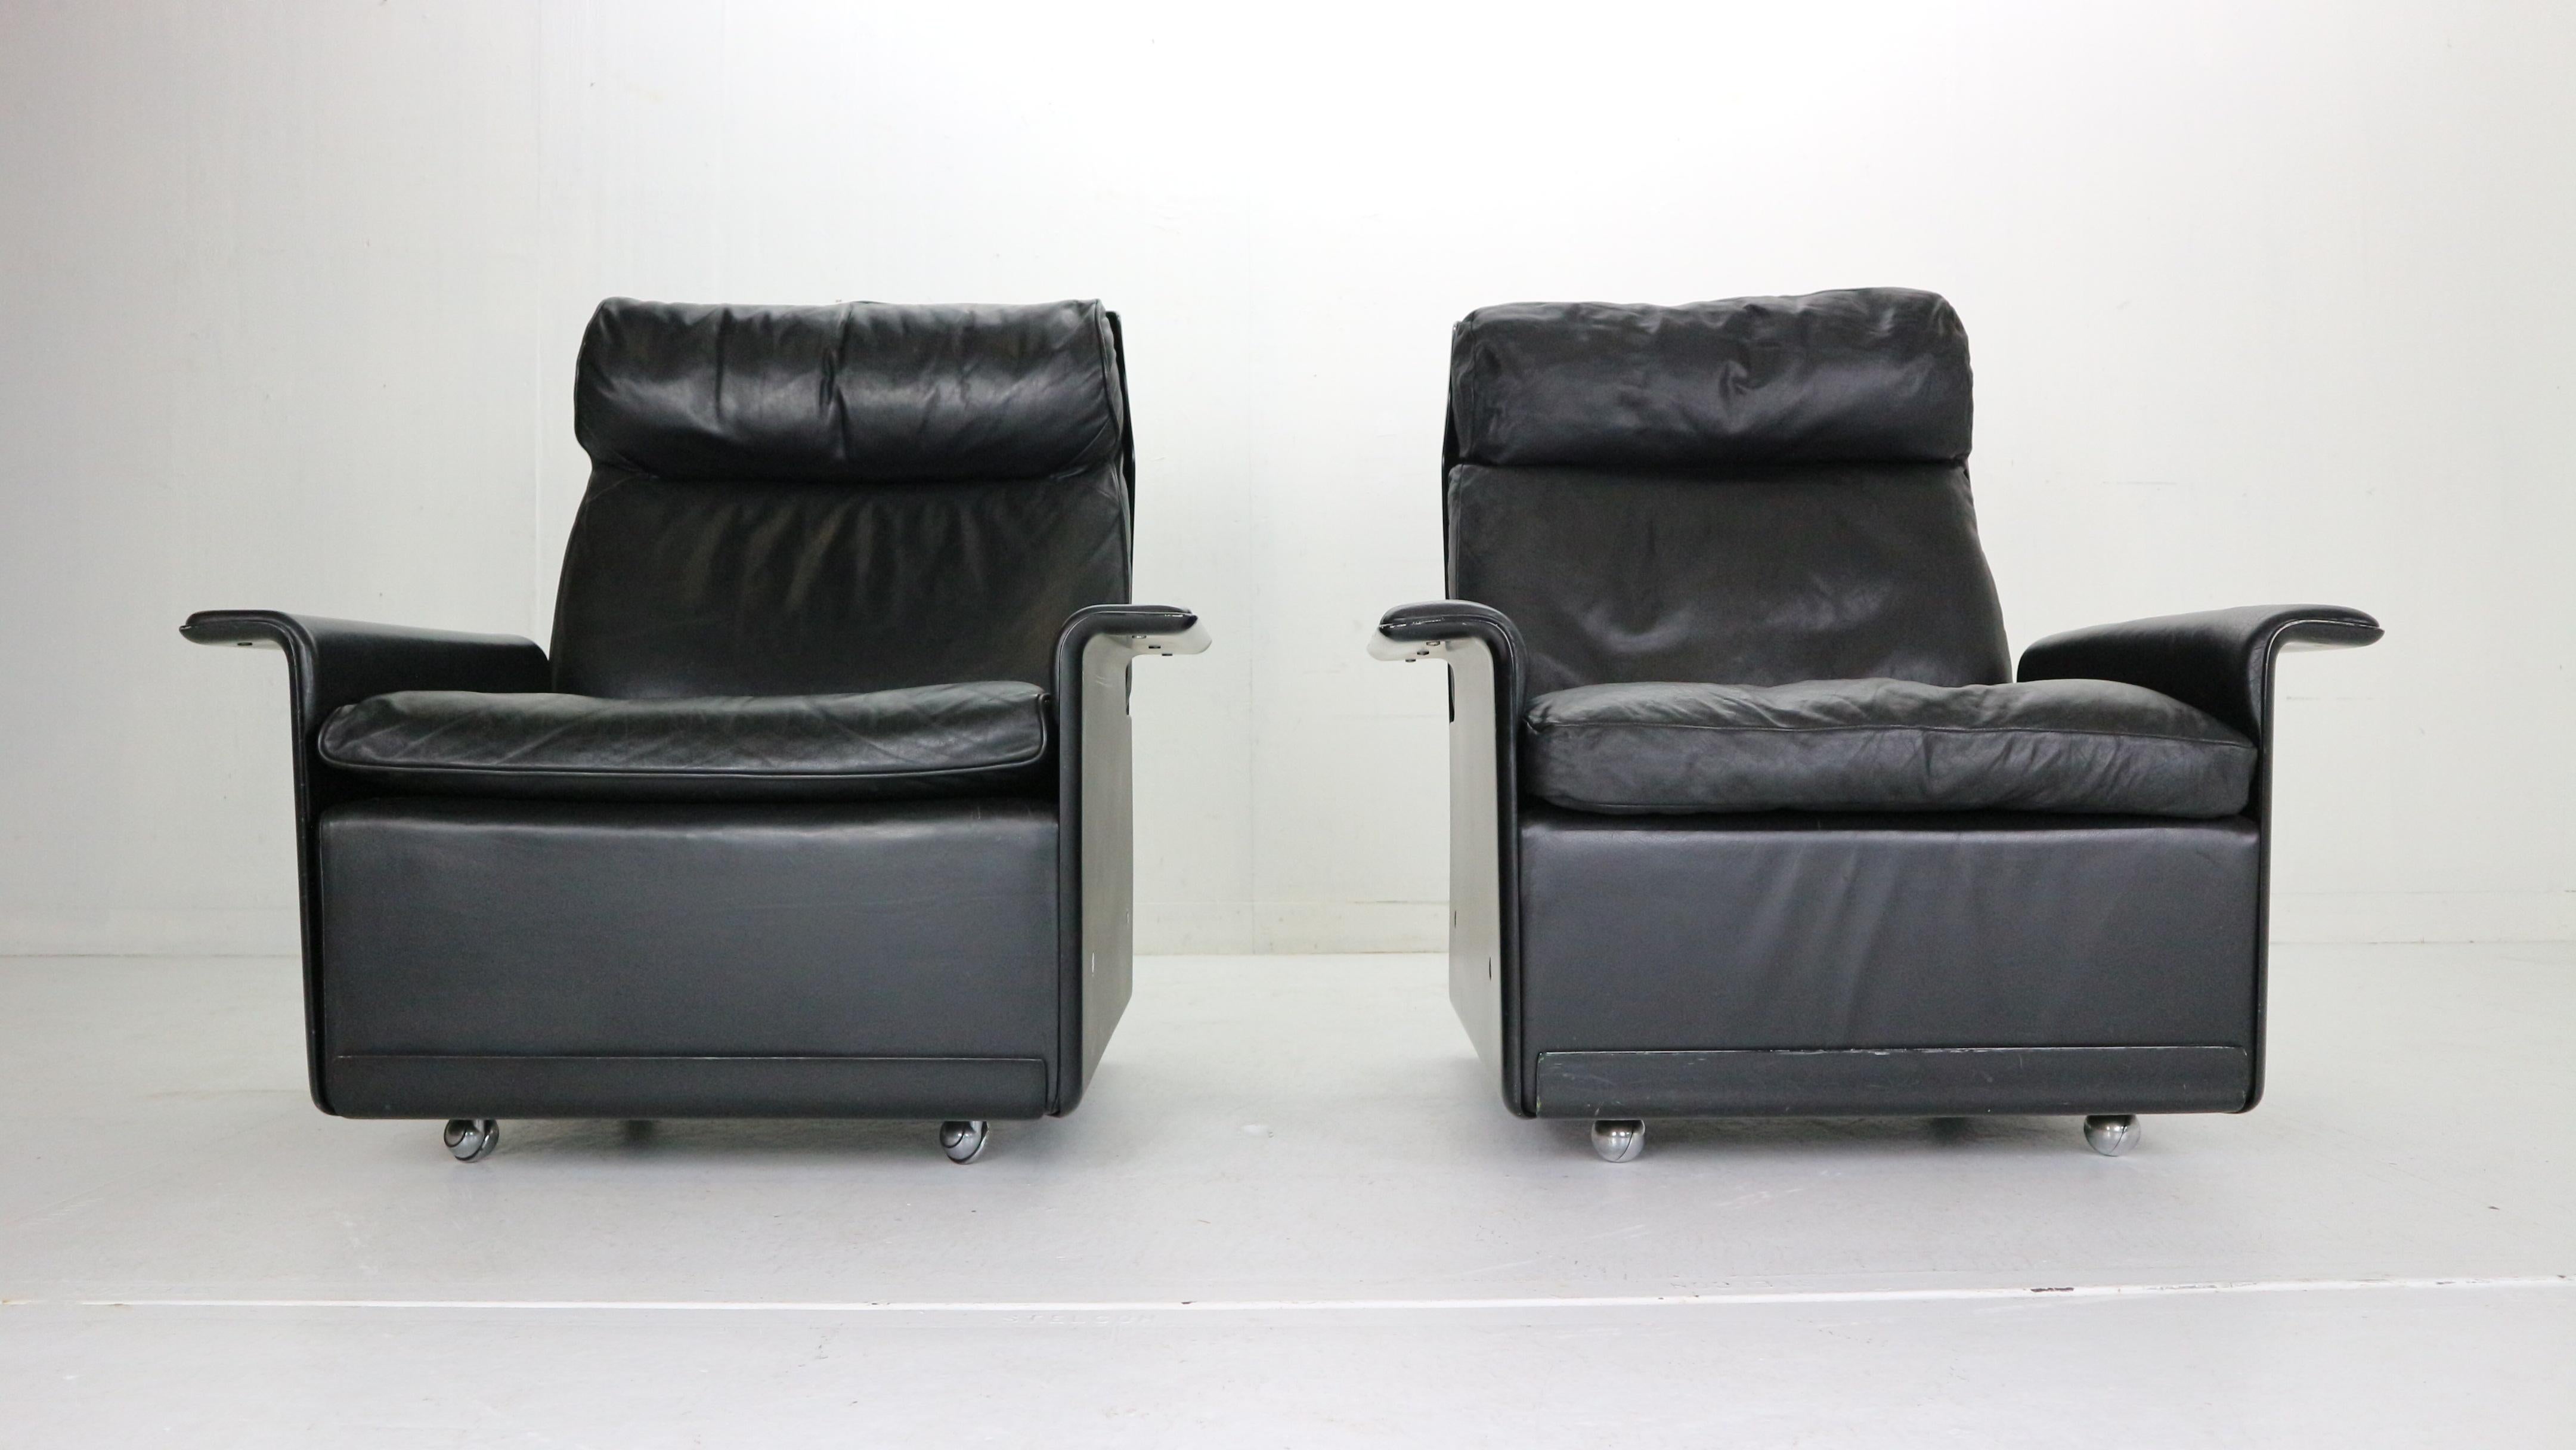 Black leather lounge chairs designed by Dieter Rams back in 1962 for German manufacturer Vitsœ.
Model-620.
High-back armchair features swivel legs, black leather upholstery and fiberglass back and armrests. Excellent seating comfort.
Both chairs